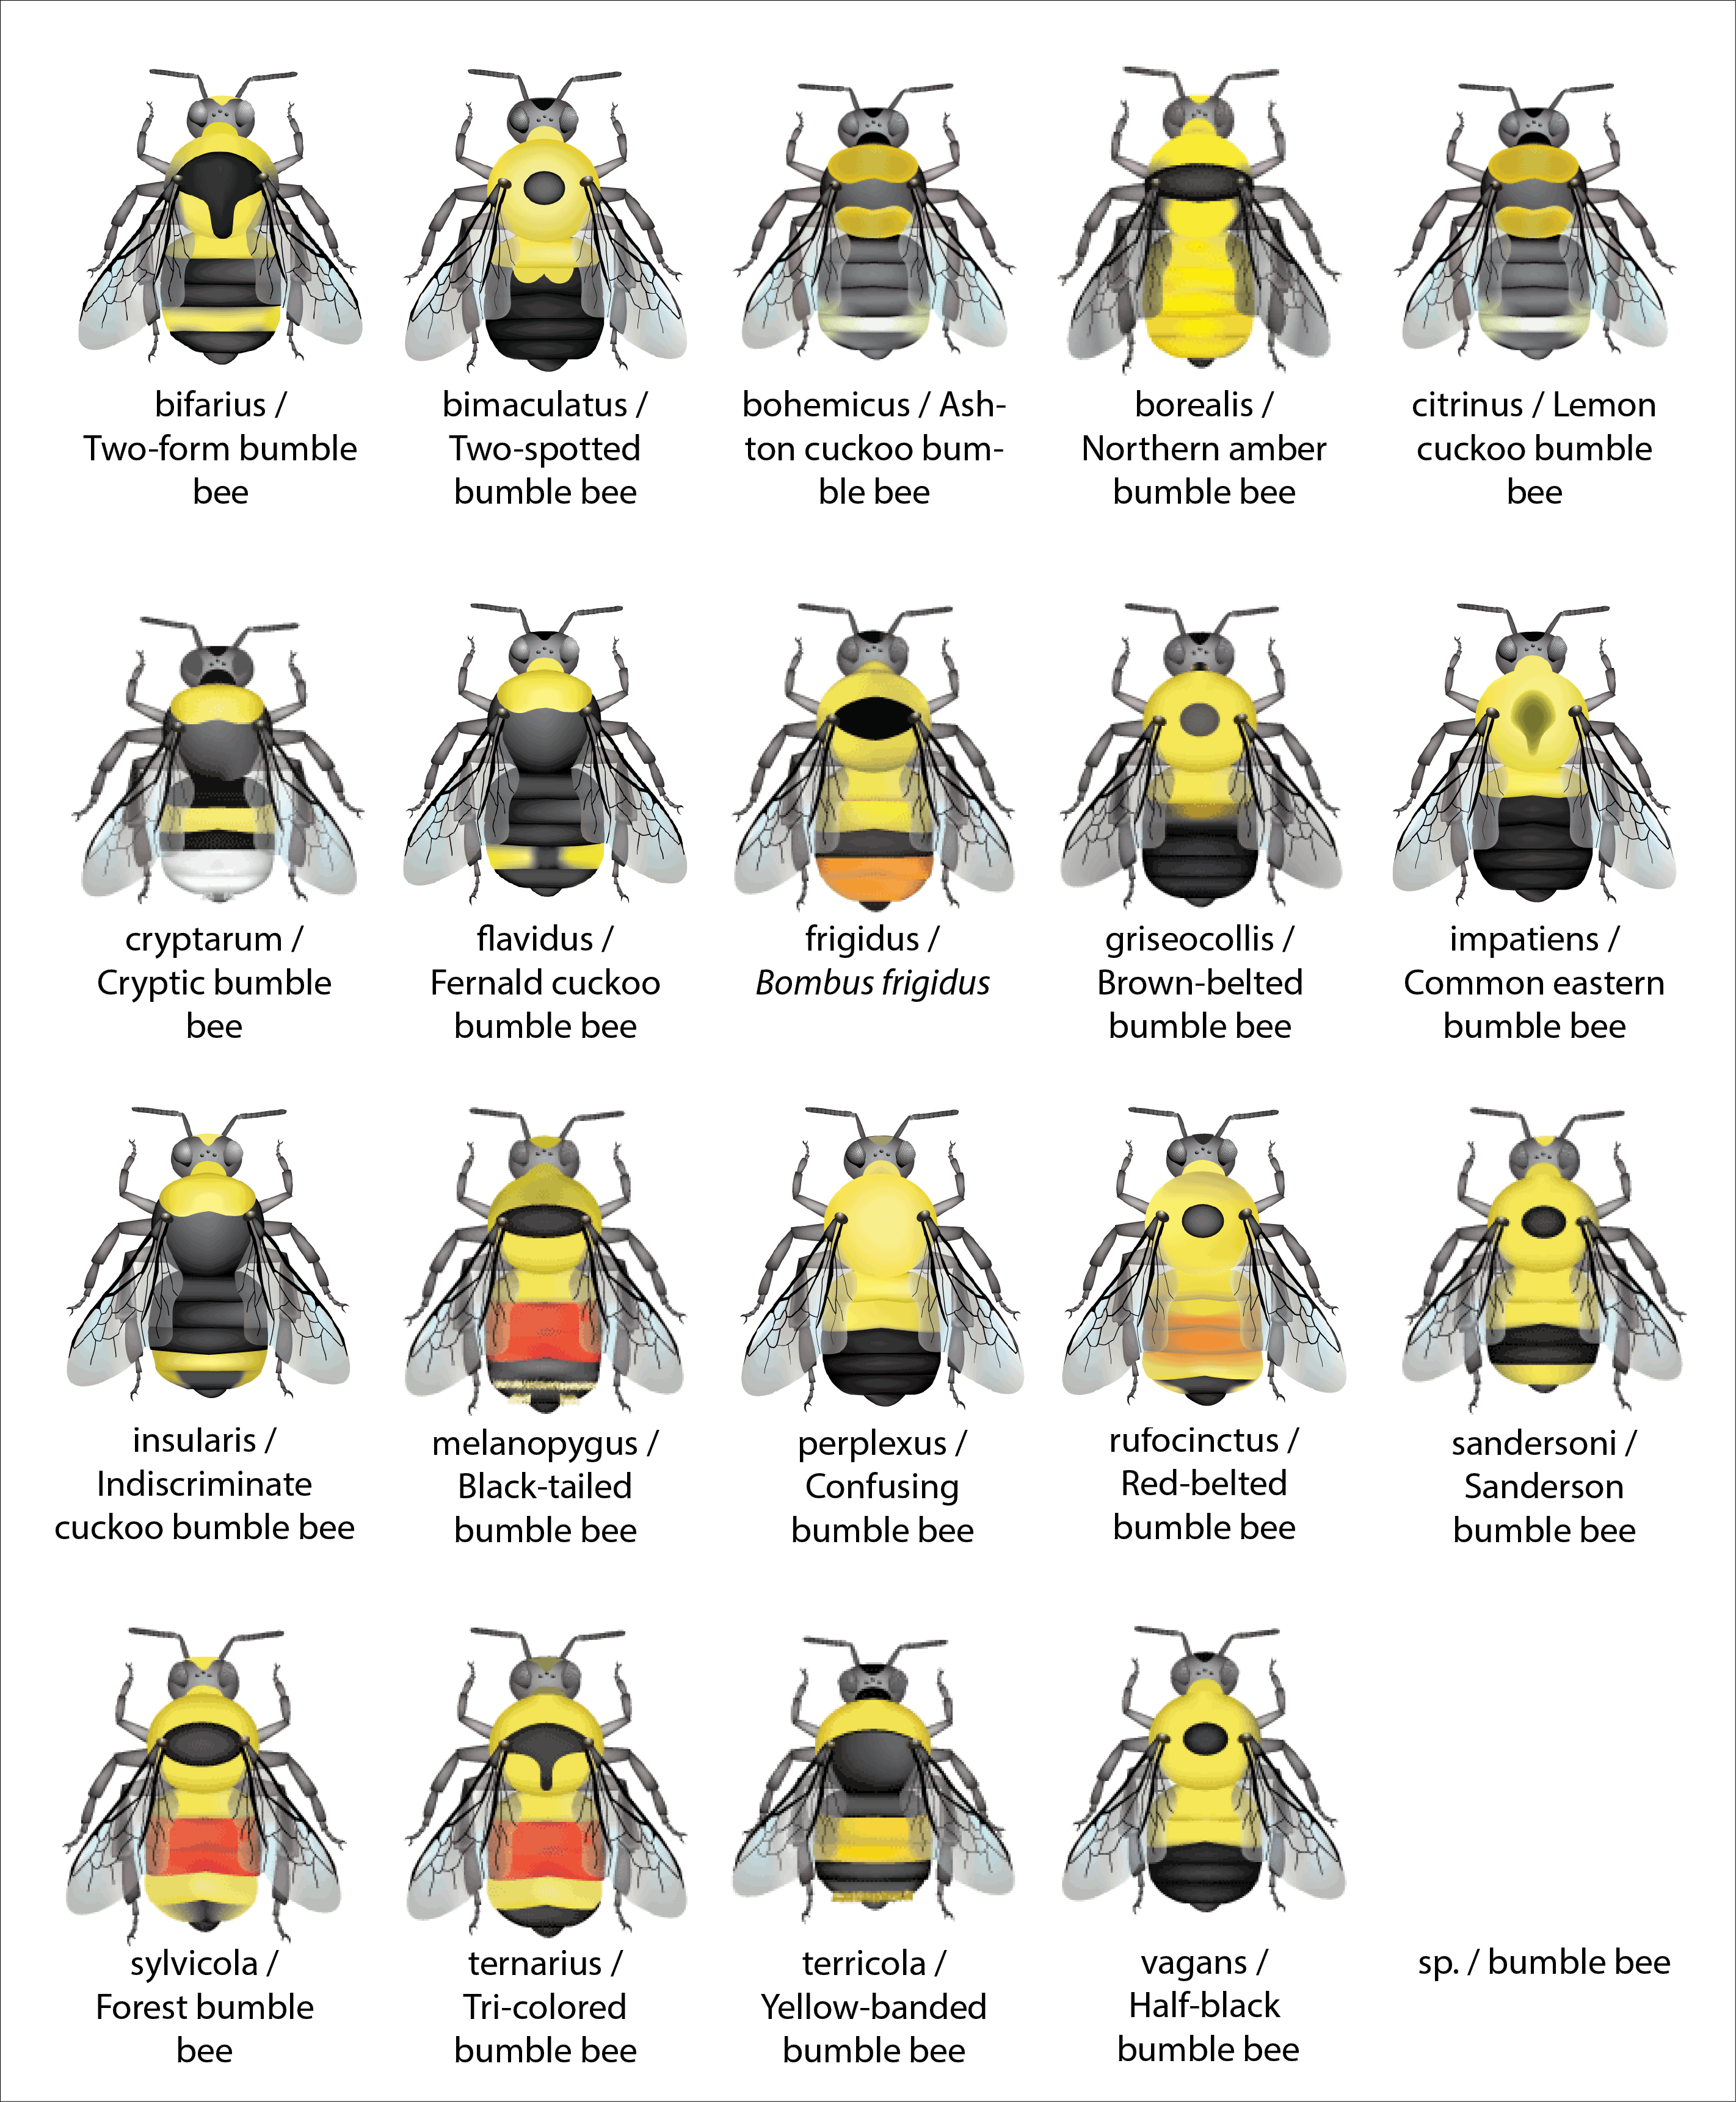 "orange, yellow, black, color pattern, Bumble Bee Watch, observations, community science"